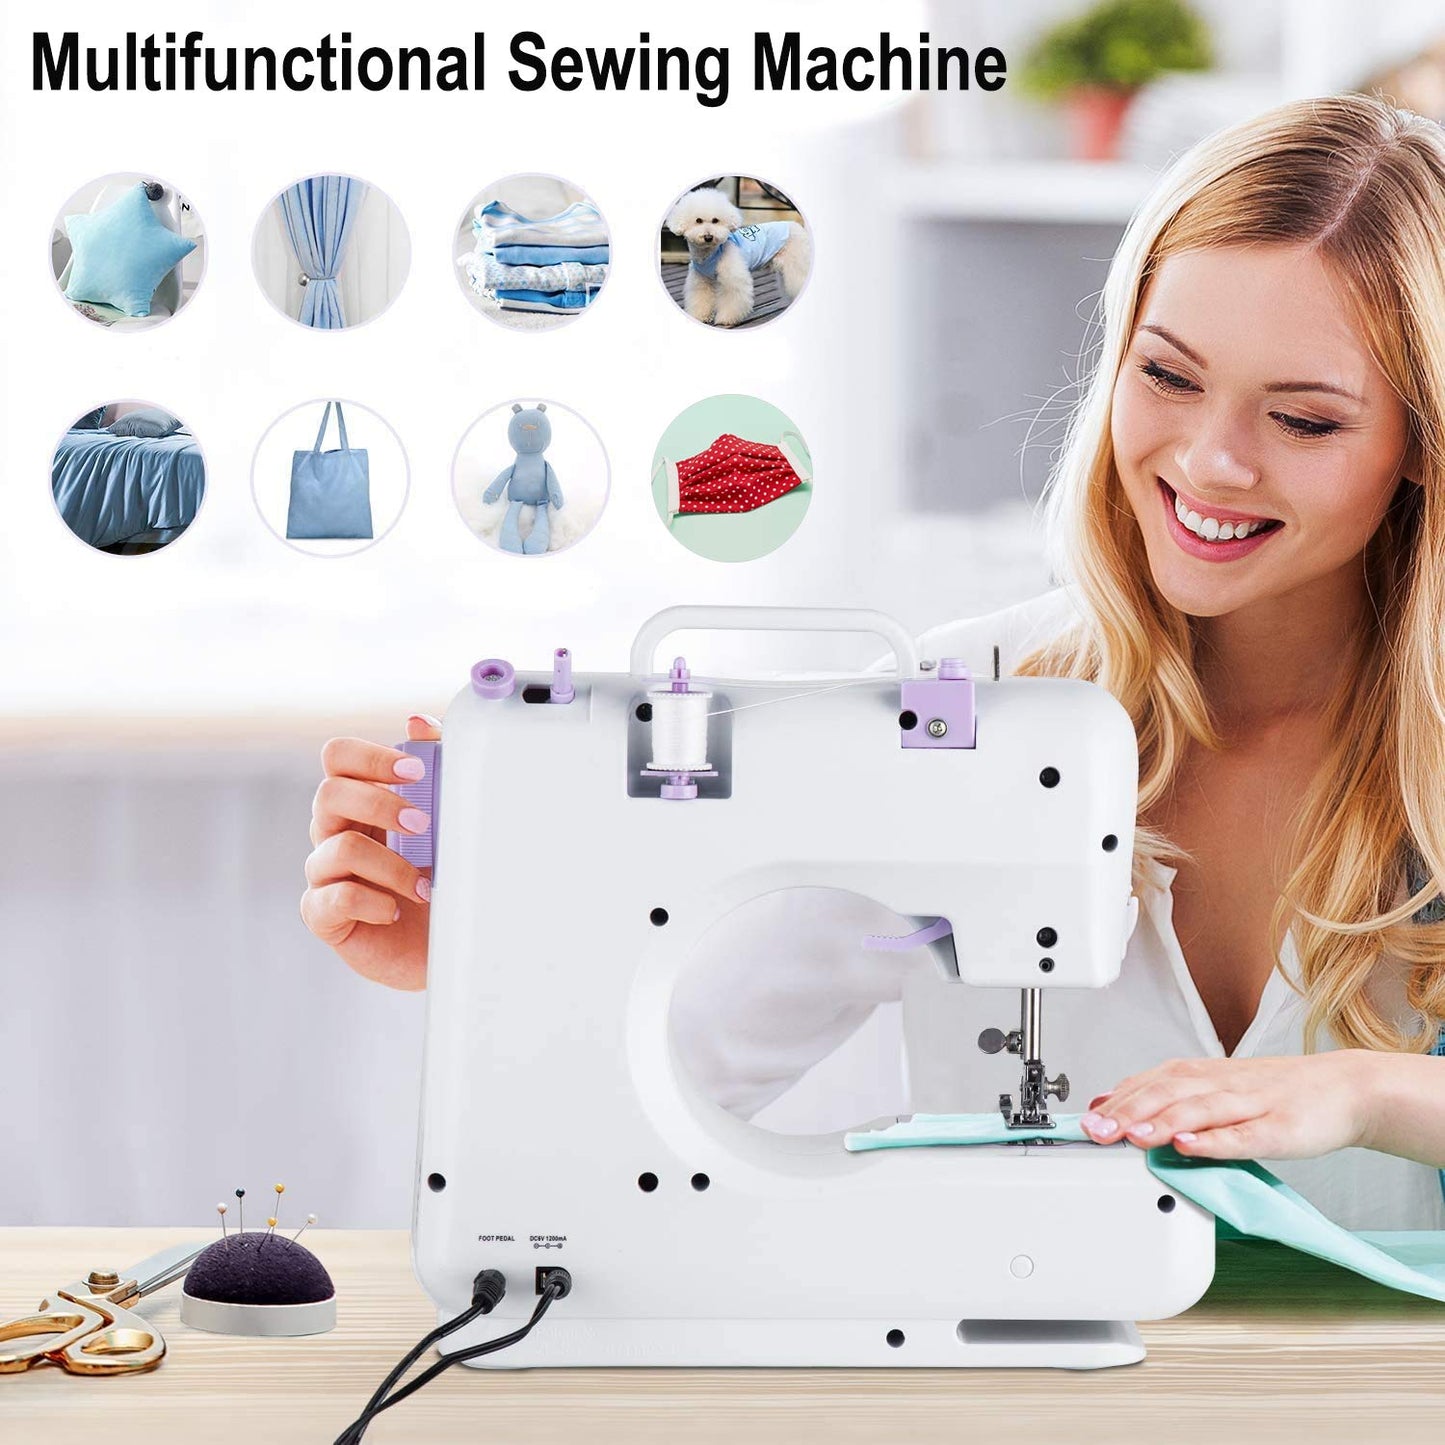 Dechow Sewing Machine for Beginners, Electric Mini Portable, 12 Built-in Stitches with Reverse Sewing, 2 Speeds Double Thread with Foot Pedal, Storage Bag, Cotton Fabric and Threads(Premium Set)